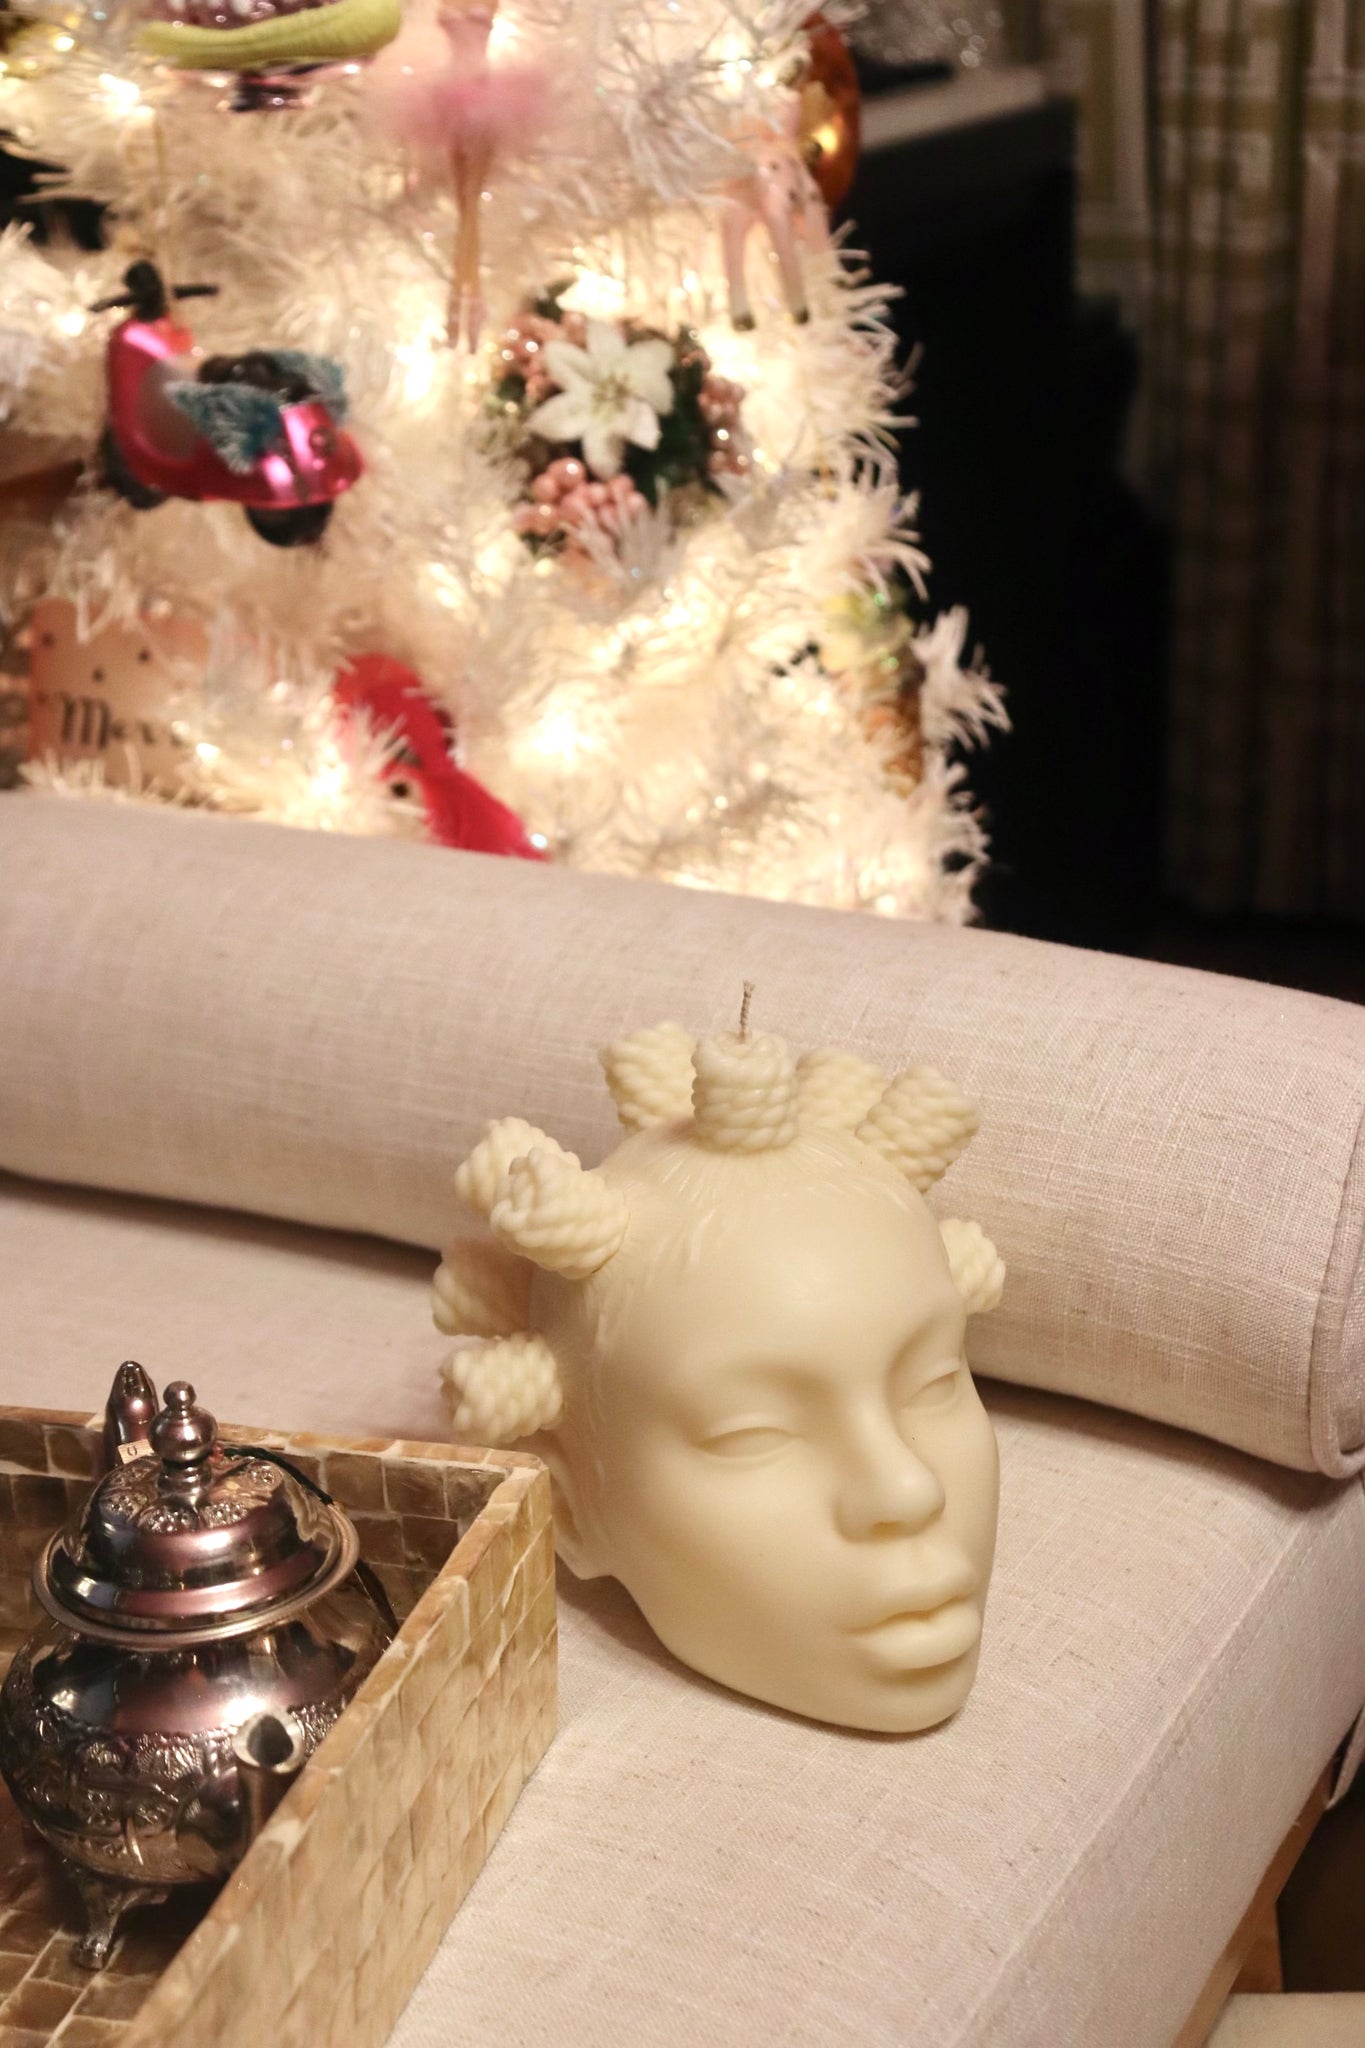 Crown Glory Bantu Knot Candle in Honeydew ™ (removable knots) - Secret Scents of Ella